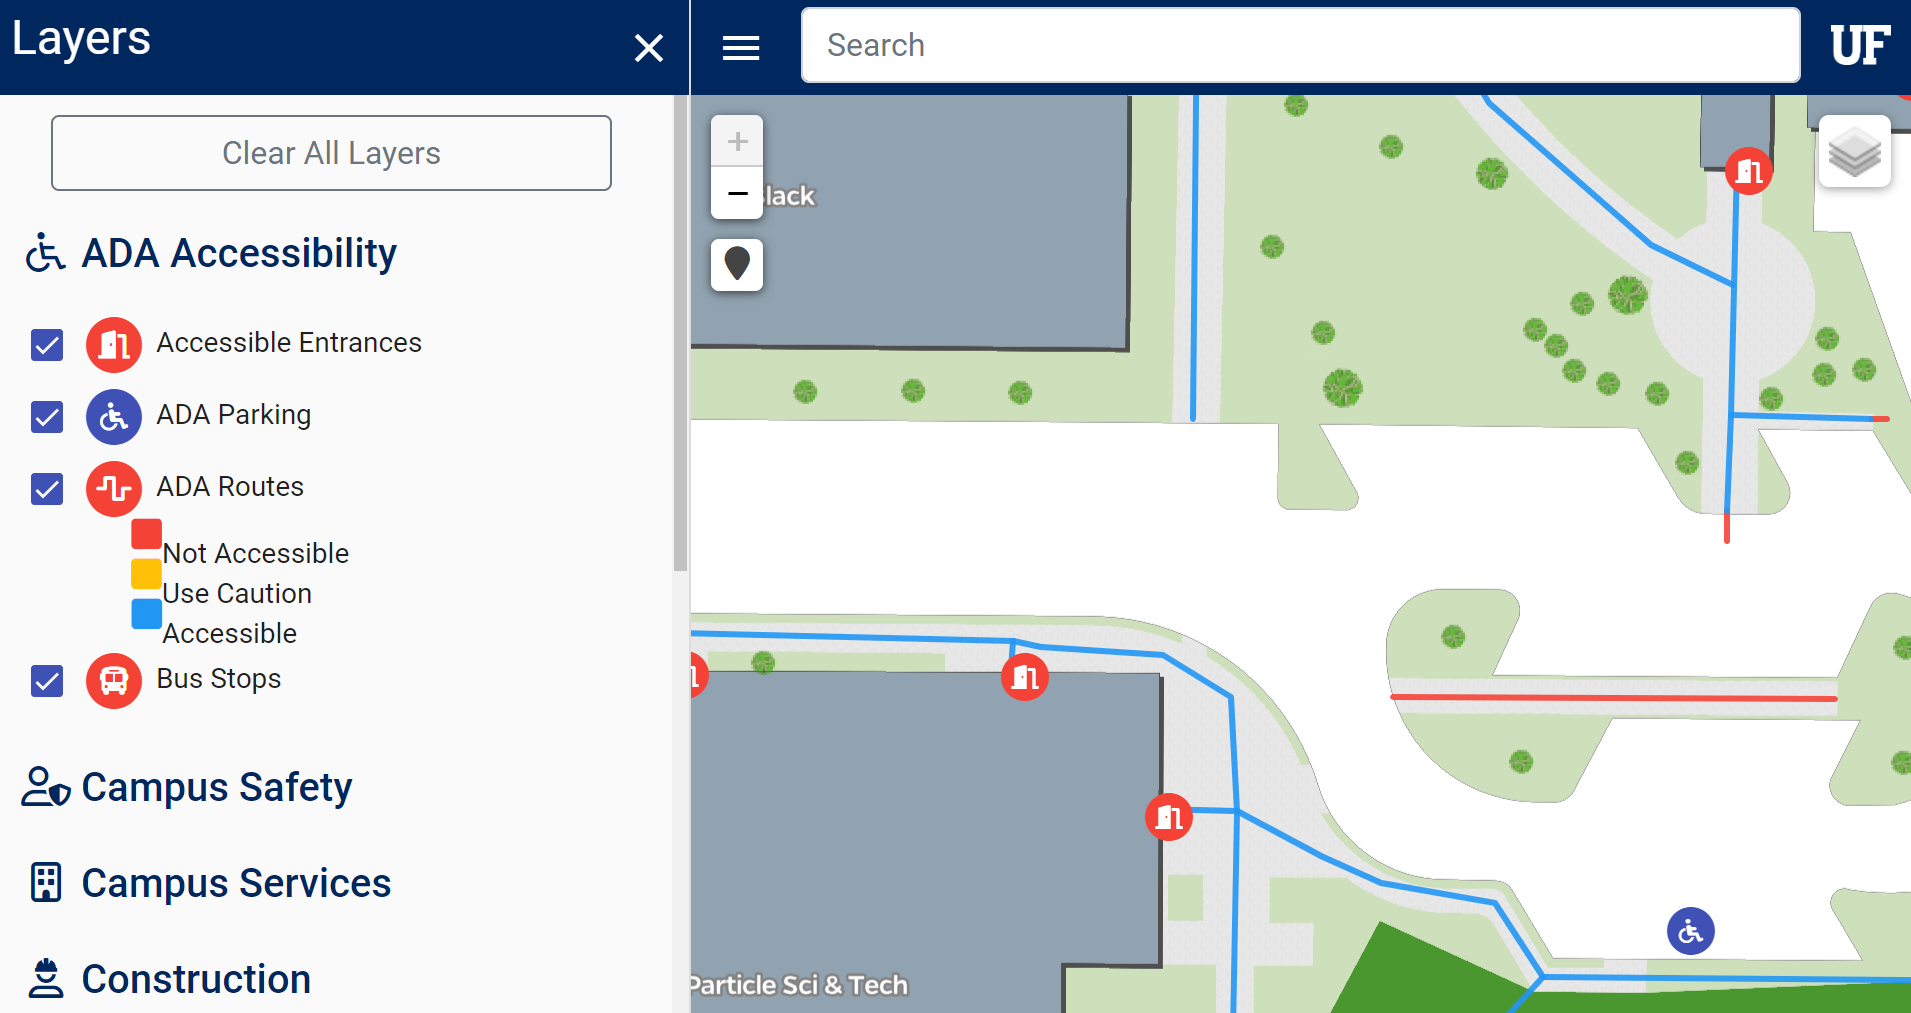 A screenshot of interactive UF Campus Map with the enabled layers for ADA accessibility features: accessible entrances; ADA parking; ADA Routes including not accessible, use caution, and accessible; bus stops.